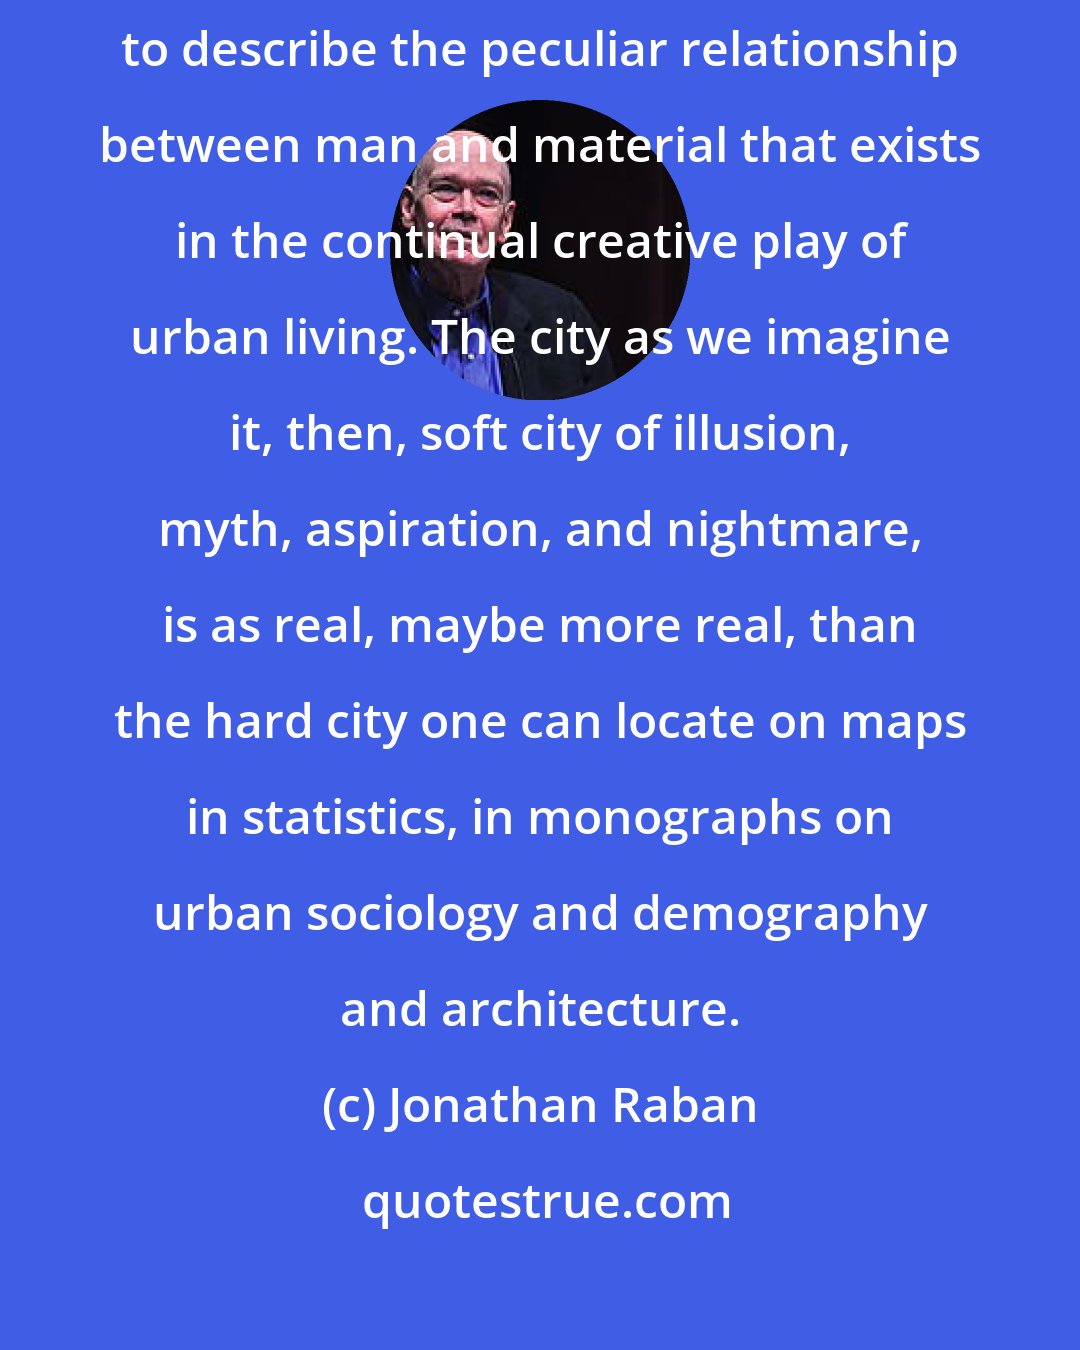 Jonathan Raban: Living in cities is an art, and we need the vocabulary of art, of style, to describe the peculiar relationship between man and material that exists in the continual creative play of urban living. The city as we imagine it, then, soft city of illusion, myth, aspiration, and nightmare, is as real, maybe more real, than the hard city one can locate on maps in statistics, in monographs on urban sociology and demography and architecture.